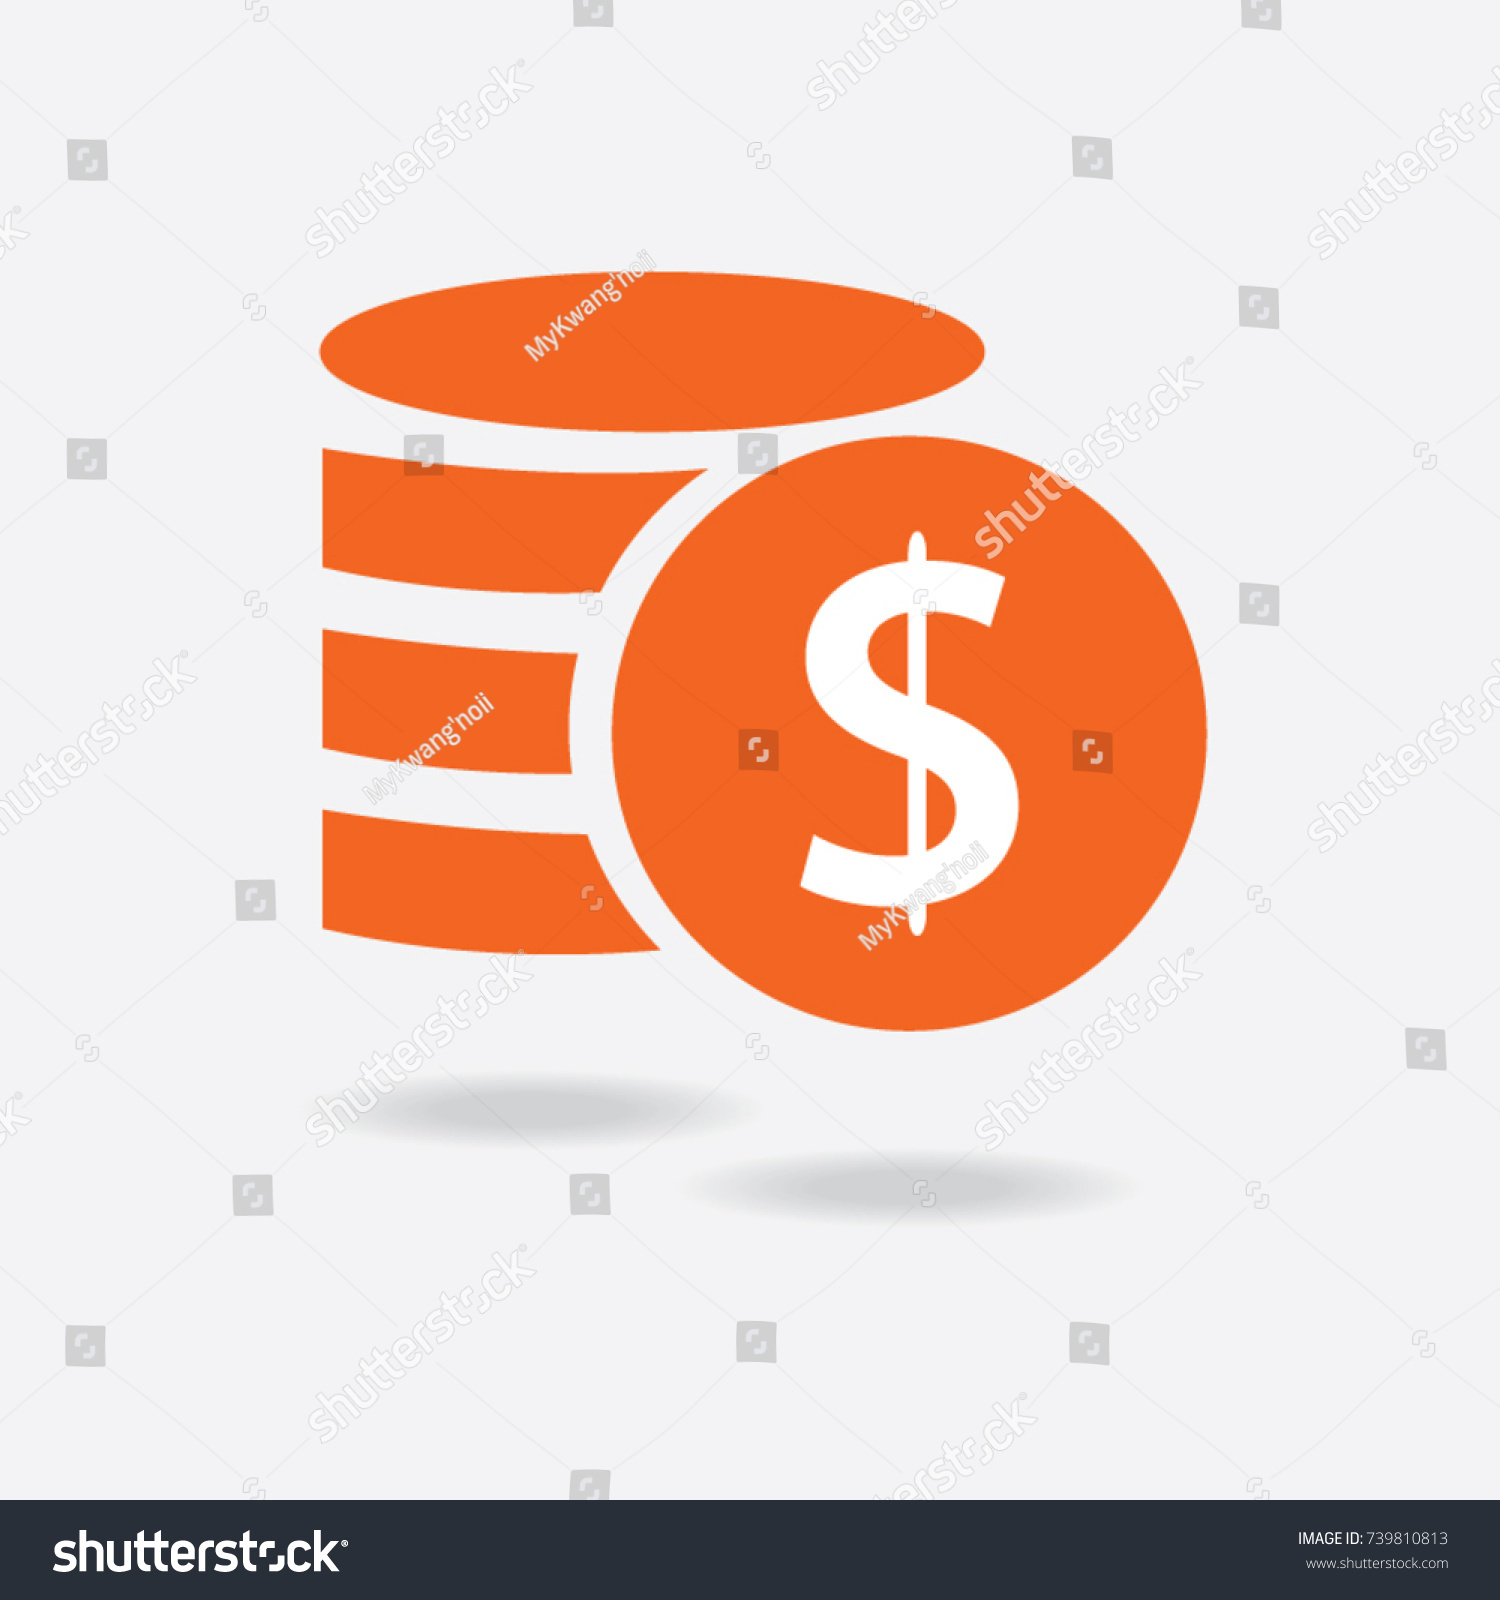 Money. Line Icon Vector. Payment system. Coins and Dollar cent Sign isolated on white background. Flat design style. Business concept. #739810813